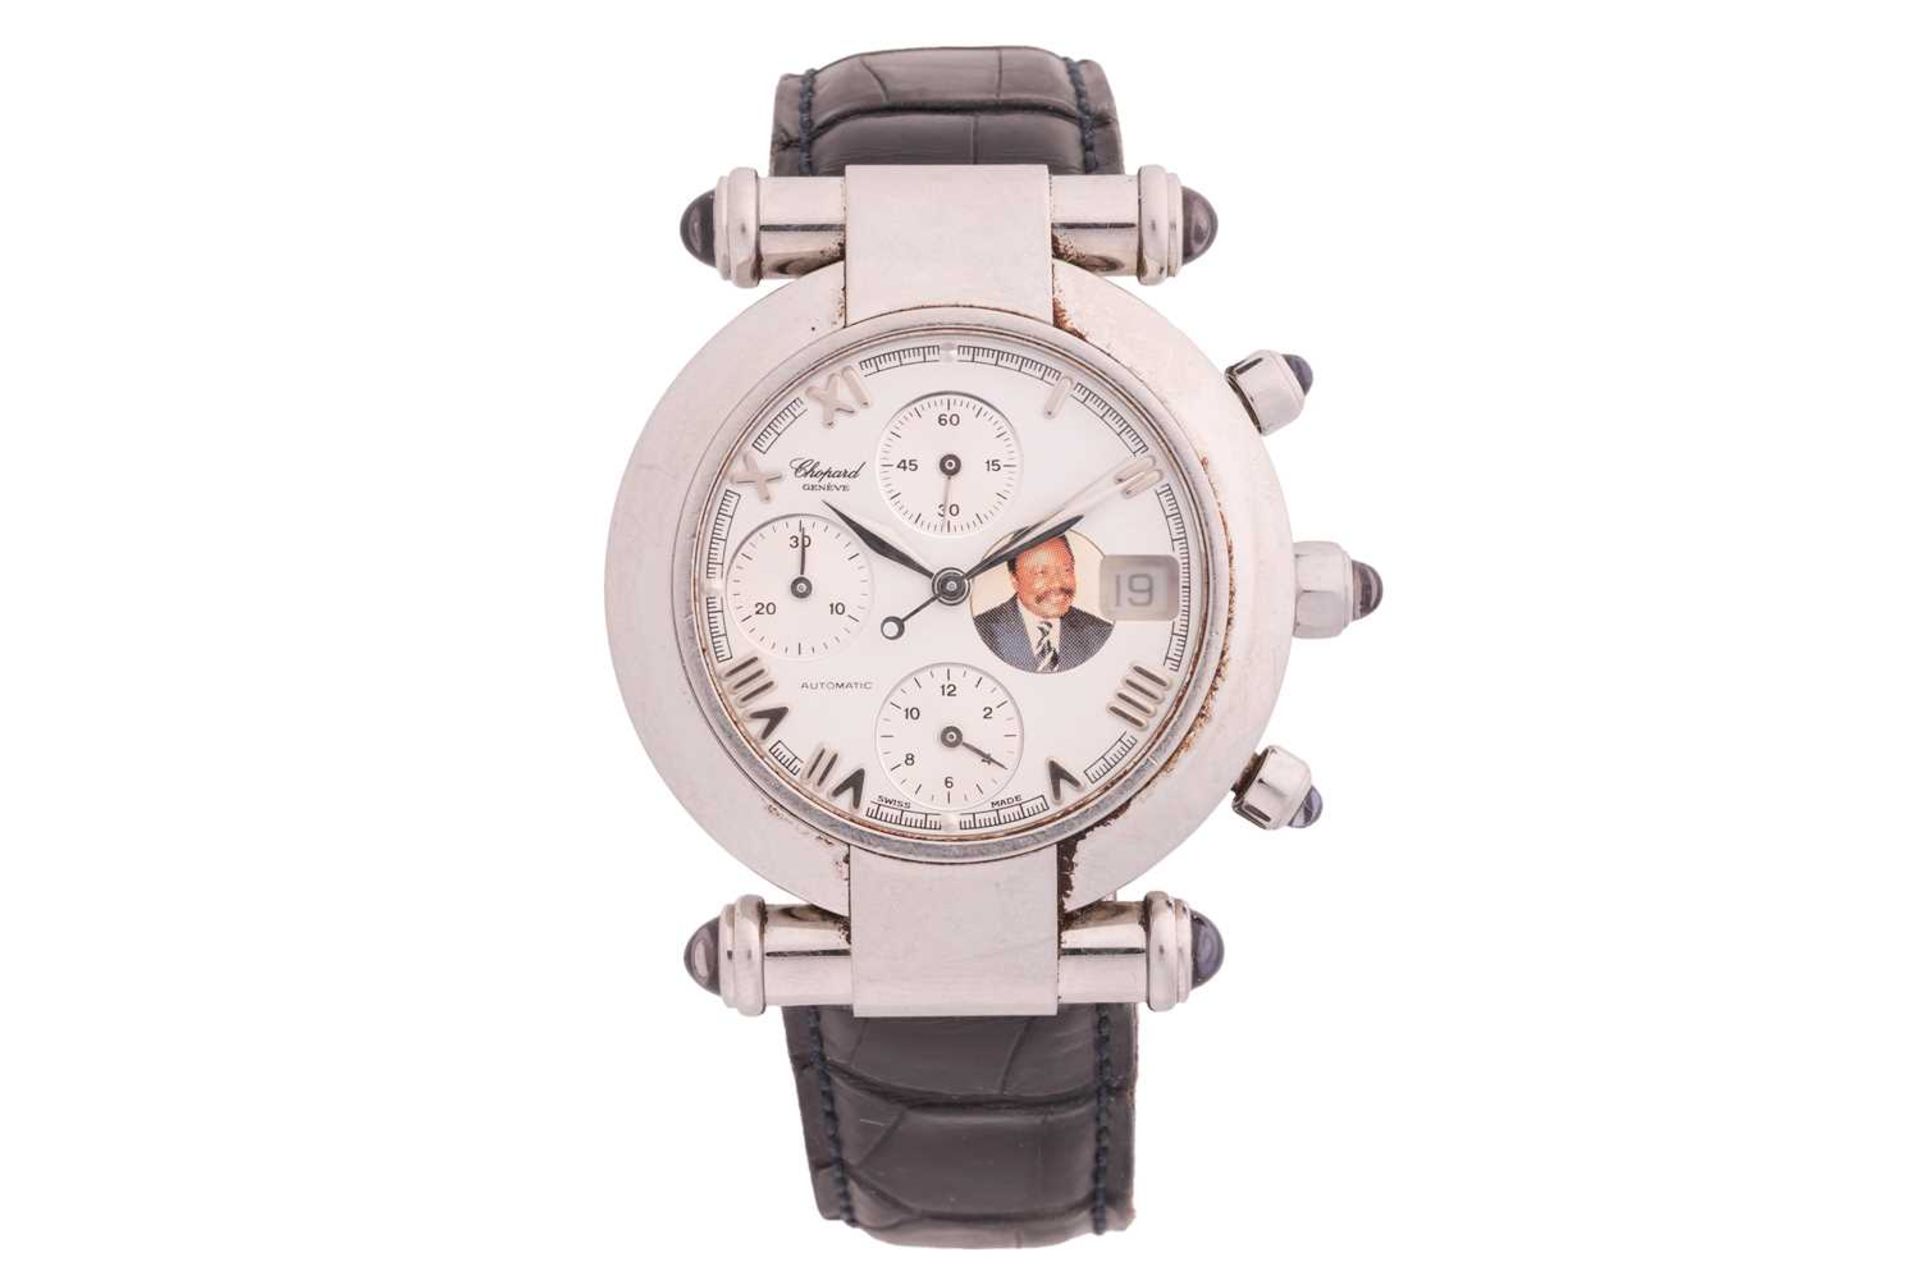 A Chopard Imperial Chronograph wristwatch. Model: 37/8209-33 Serial: 474093 Case Material: Steel Cas